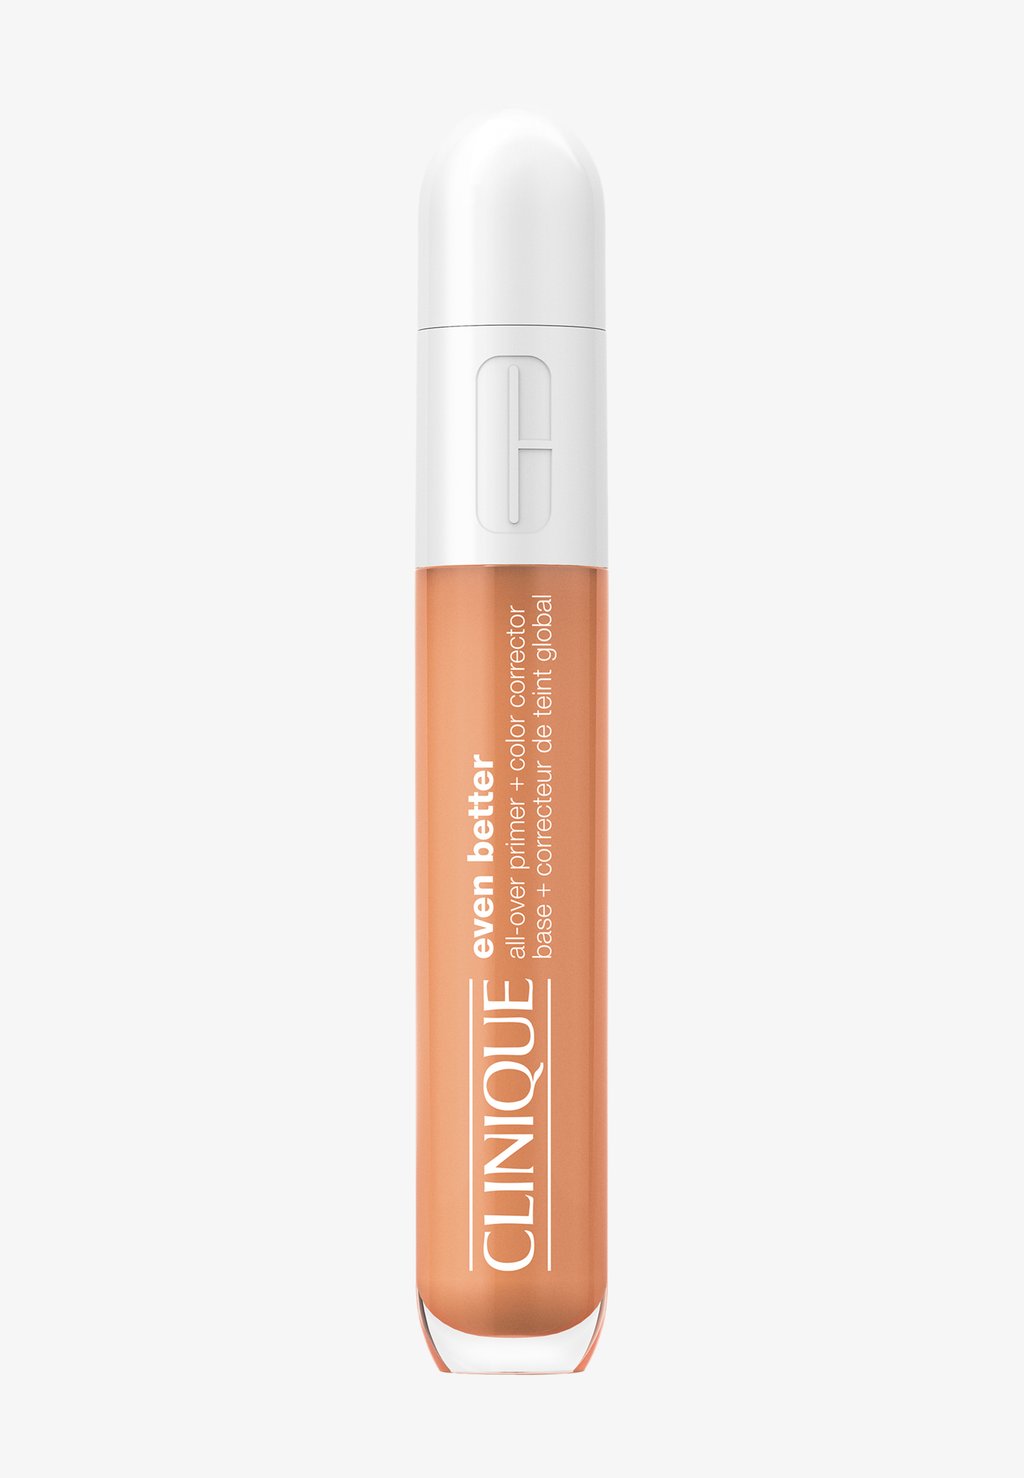 Праймер Even Better All Over Primer + Color Corrector Clinique, цвет apricot clinique even better all over concealer eraser